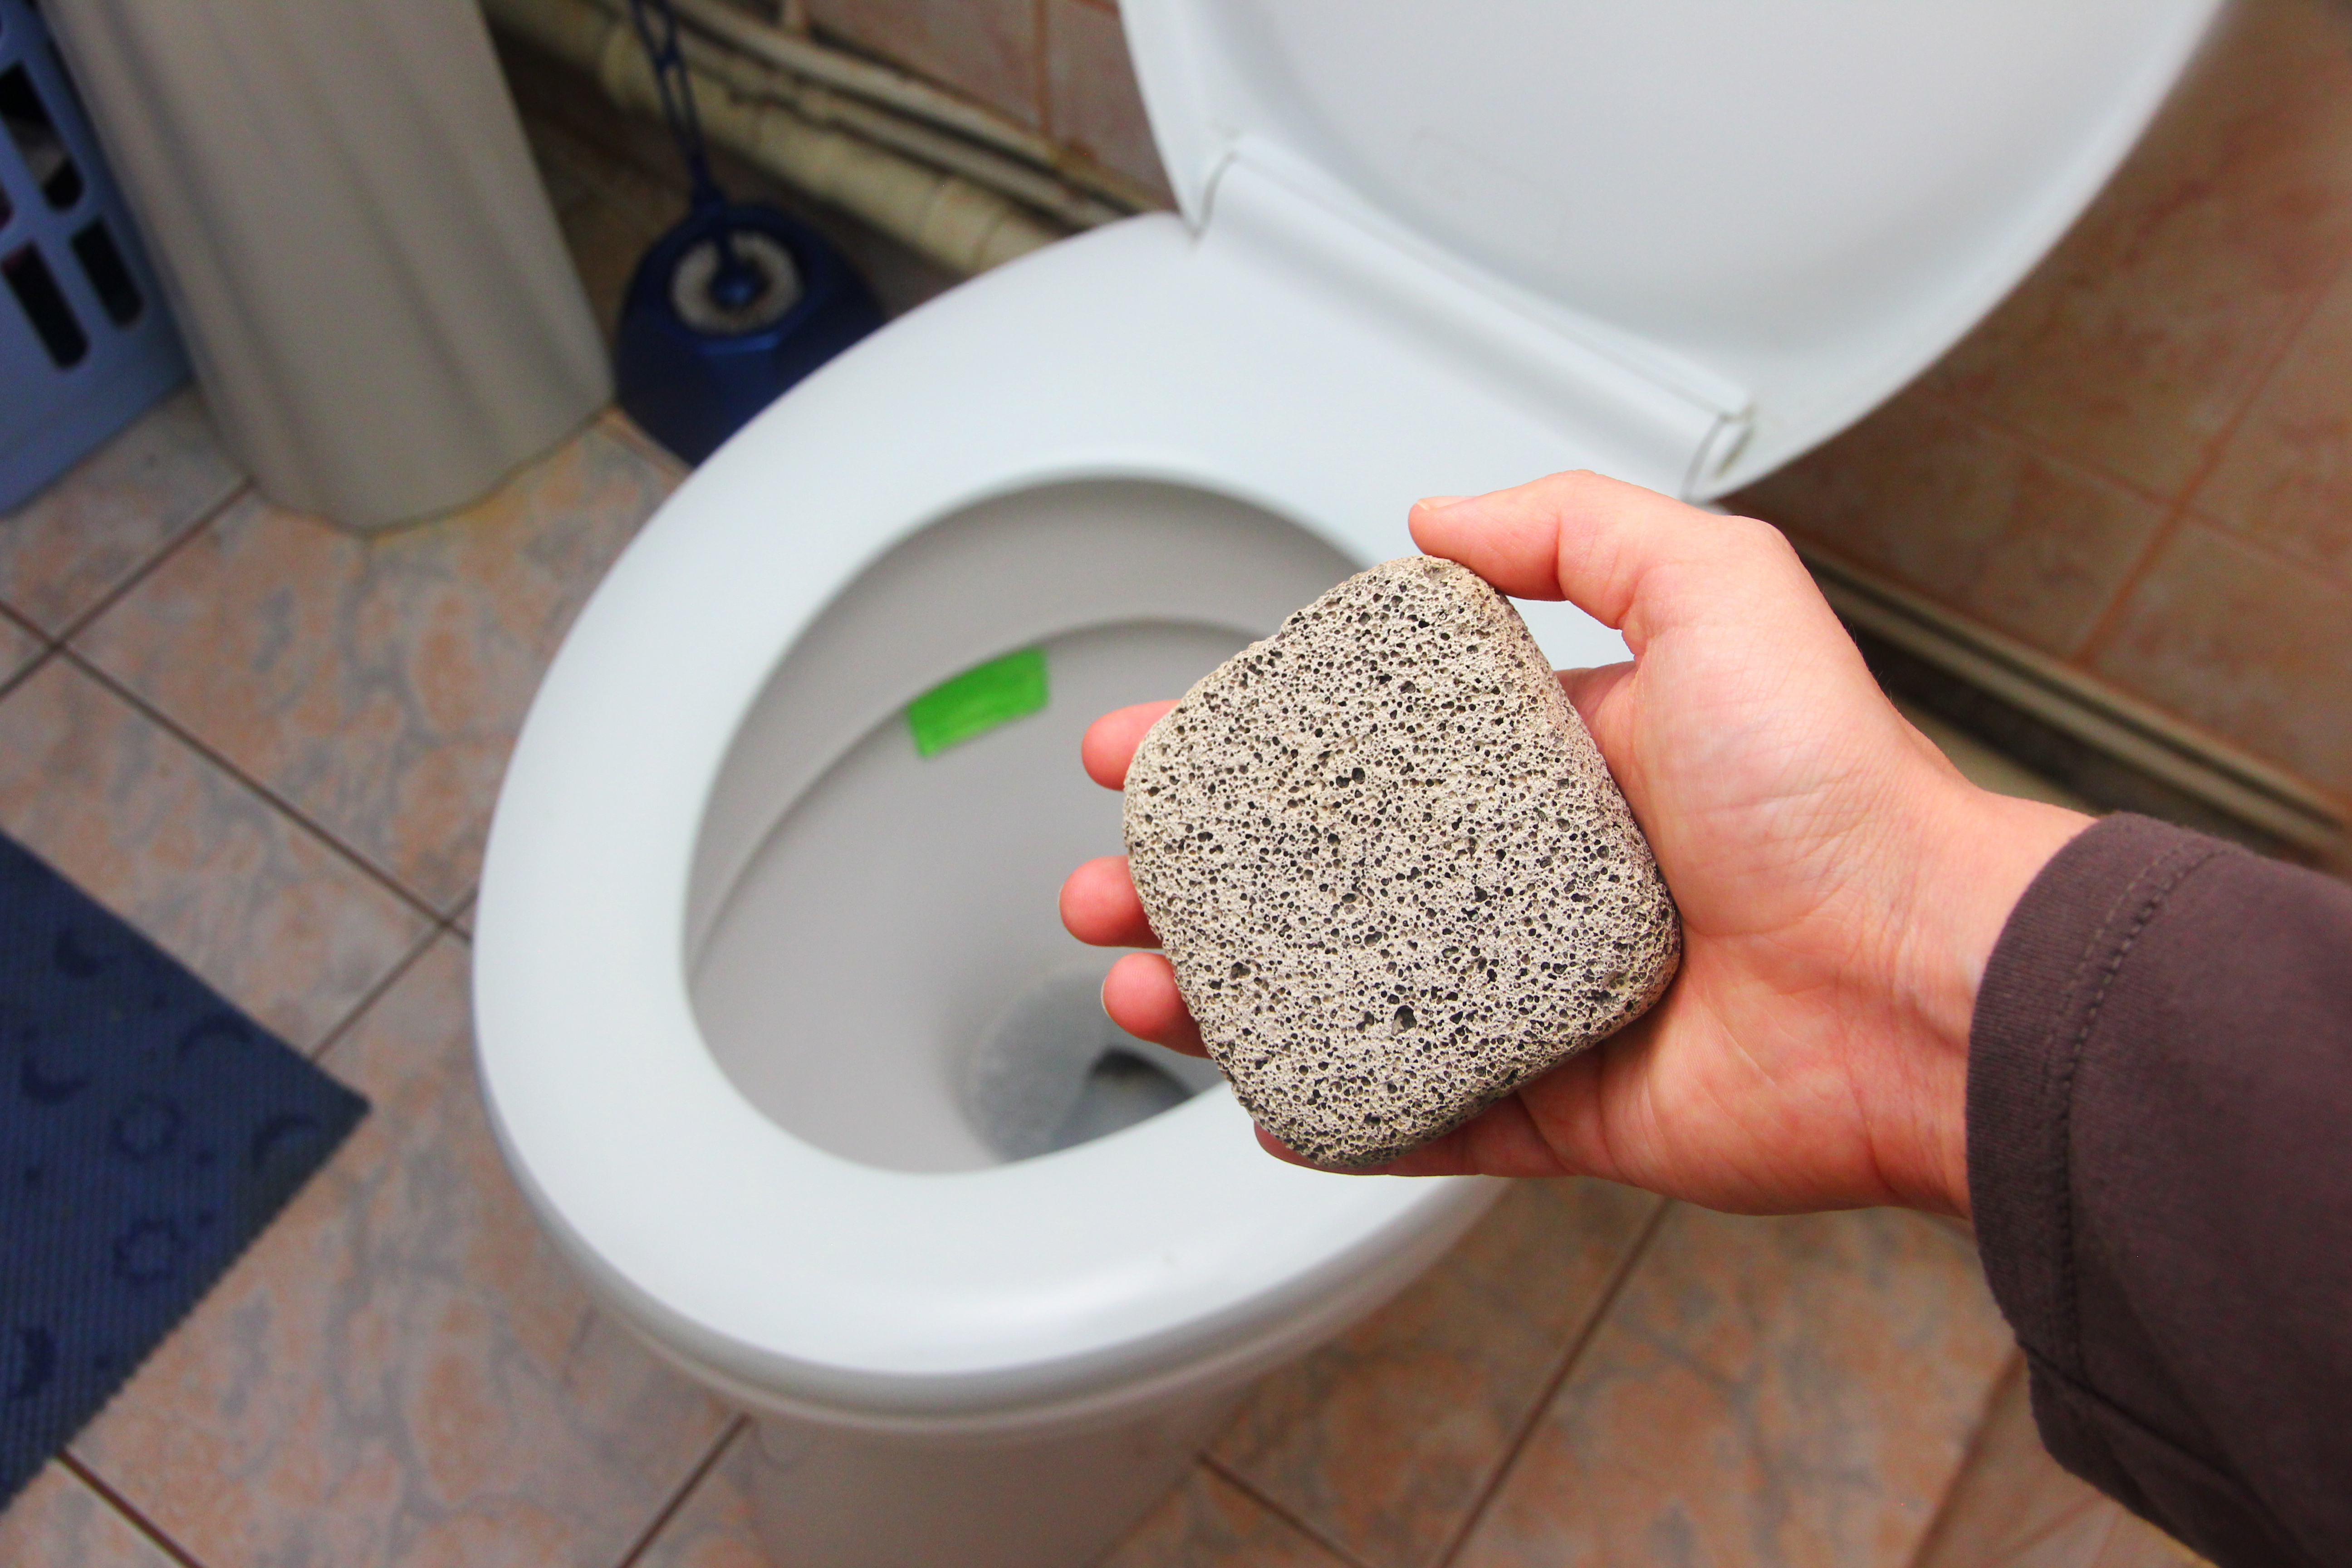 How to Clean the Worst Hard Water Stains From Your Toilet | Lifehacker